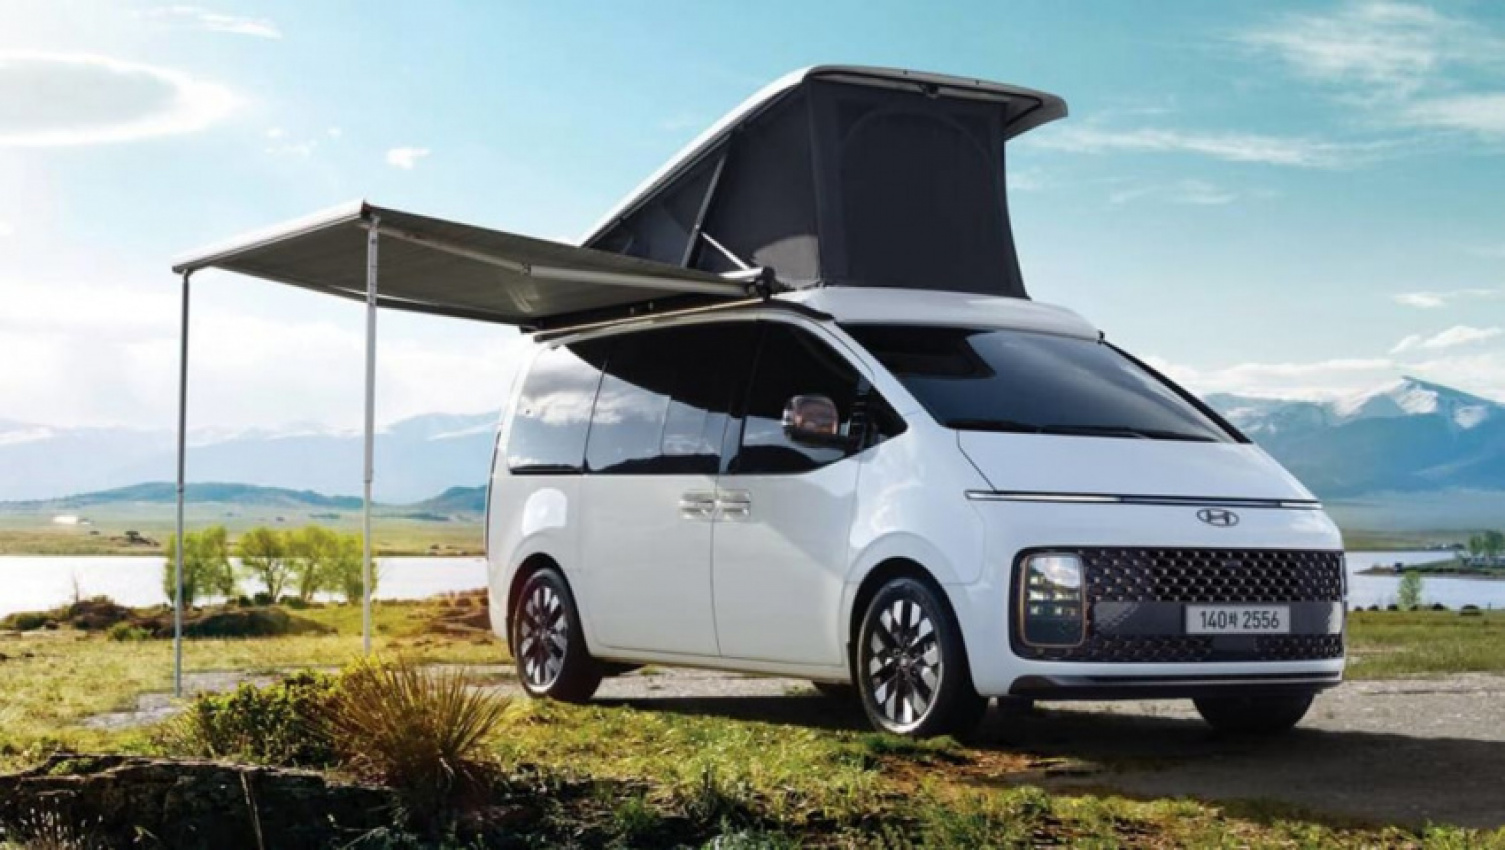 autos, cars, hyundai, mercedes-benz, volkswagen, camper trailers, hyundai news, hyundai people mover range, hyundai staria, hyundai staria 2022, industry news, mercedes, people mover, showroom news, is this the ultimate glamping car? 2022 hyundai staria lounge camper is sleek alternative to the mercedes-benz marco polo and volkswagen california